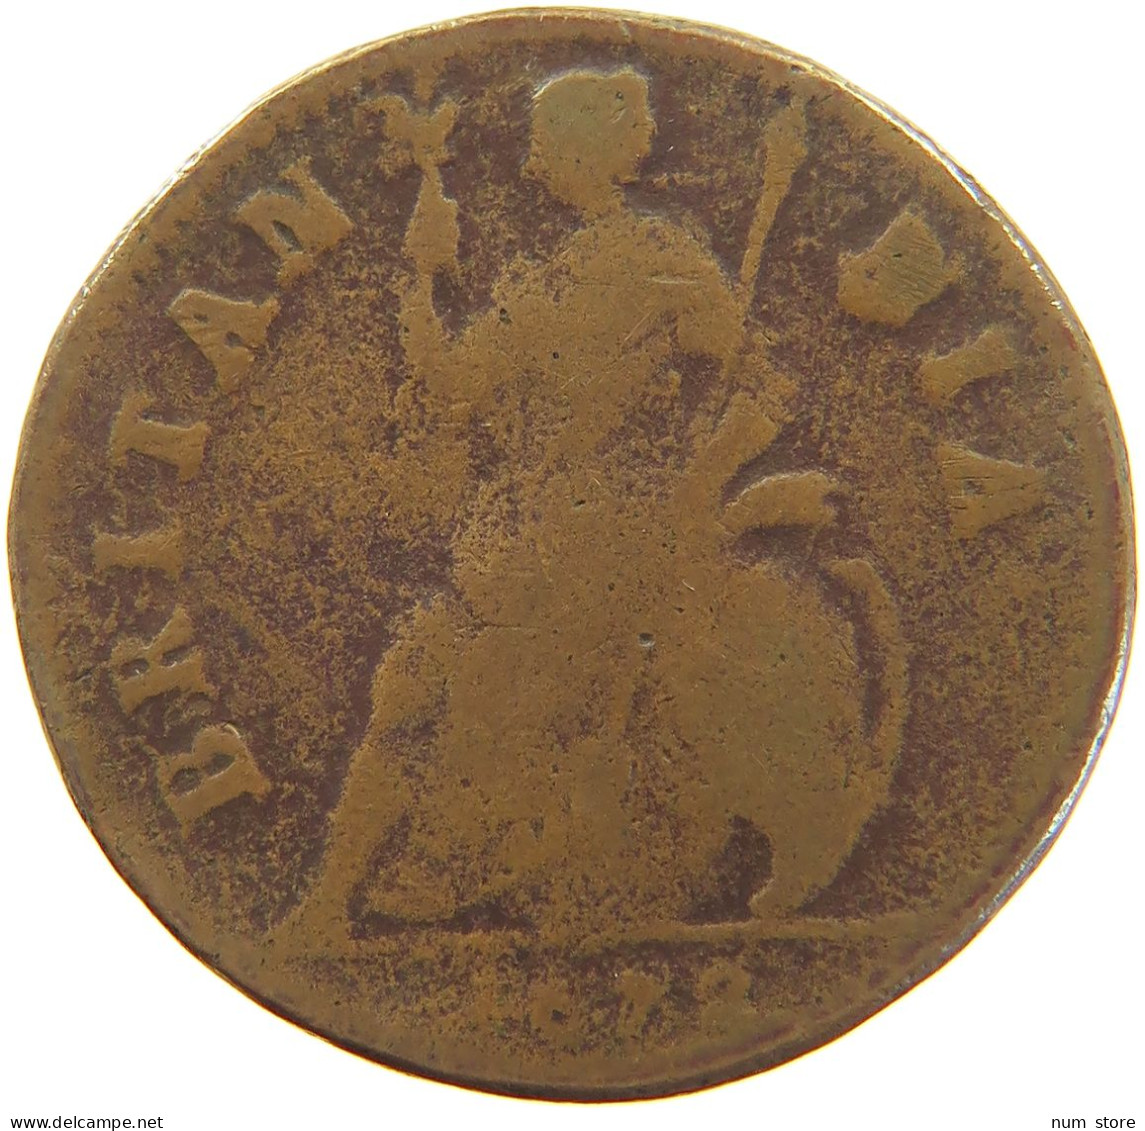 GREAT BRITAIN FARTHING 1672 Charles II (1660-1685) #t021 0169 - A. 1 Farthing